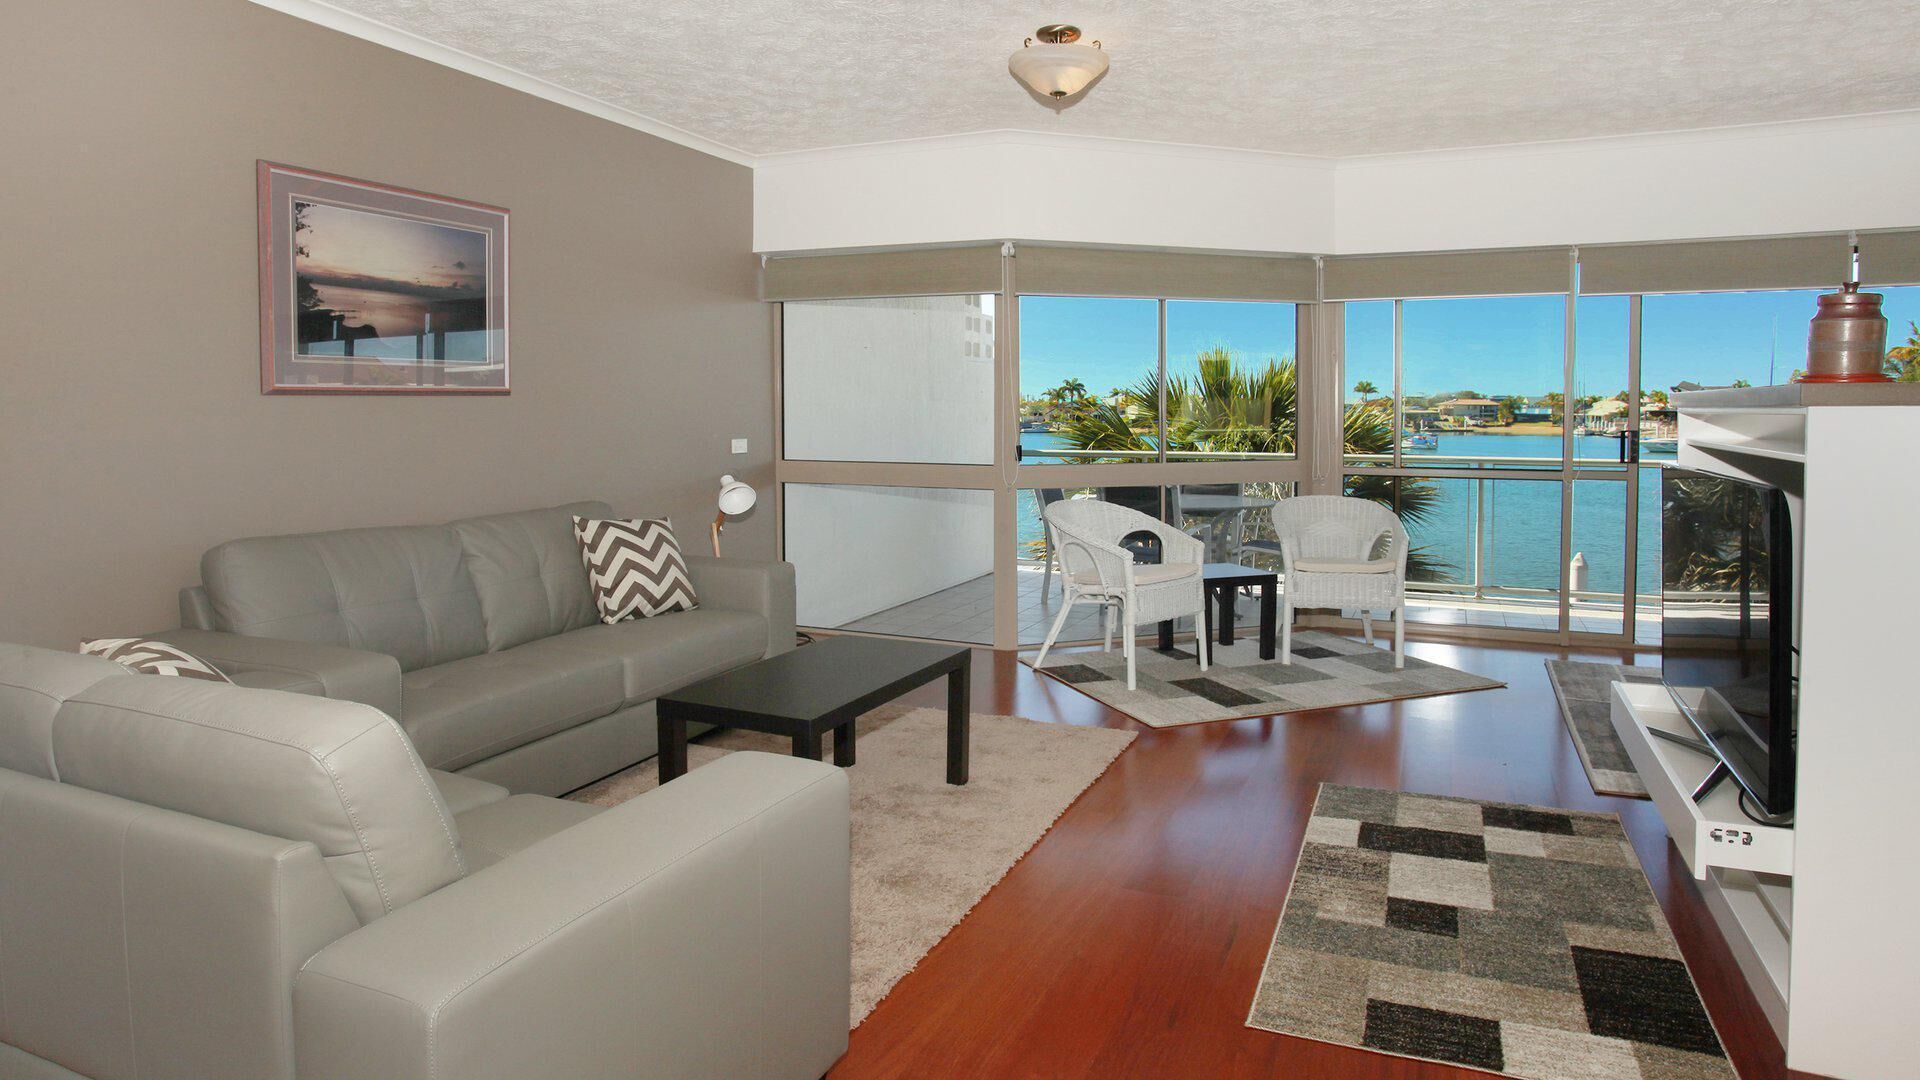 Serenity Waters 6 - 2 Bedroom + Sofa bed (sleep 5) apartment on canal in the heart of Mooloolaba